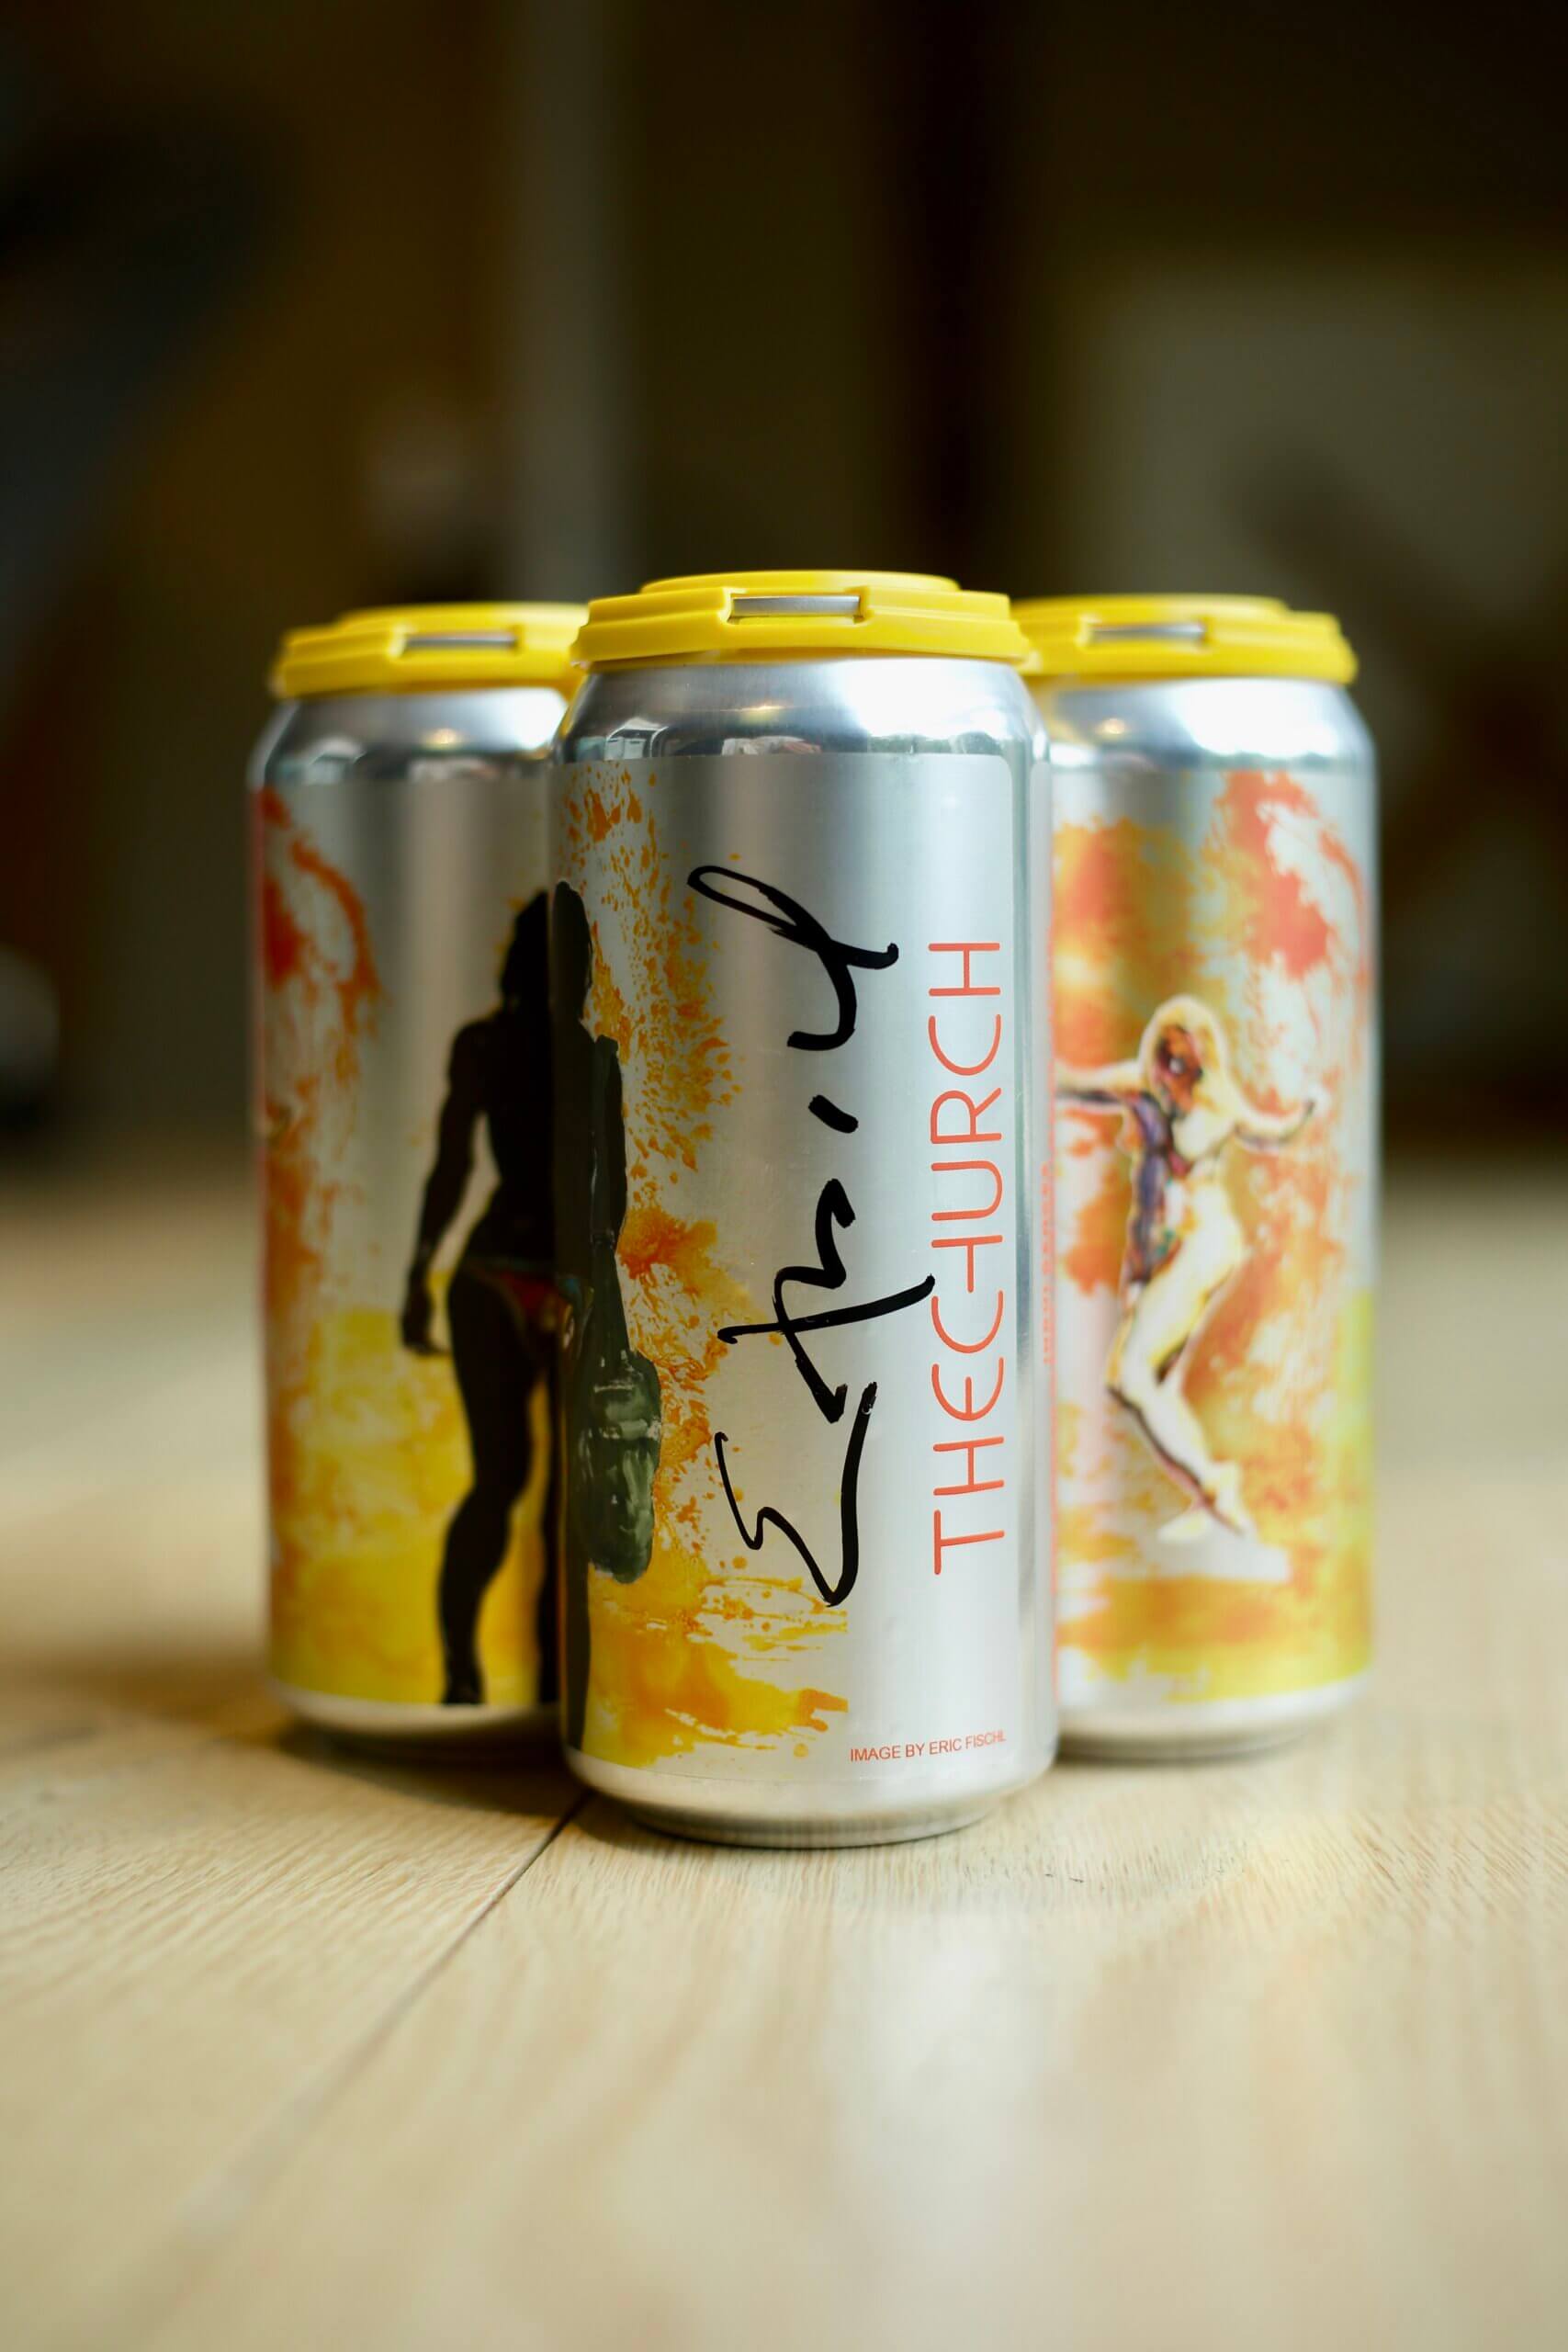 Indulgences, a limited edition pilsner from Kidd Squid featuring a label design by Eric Fischl